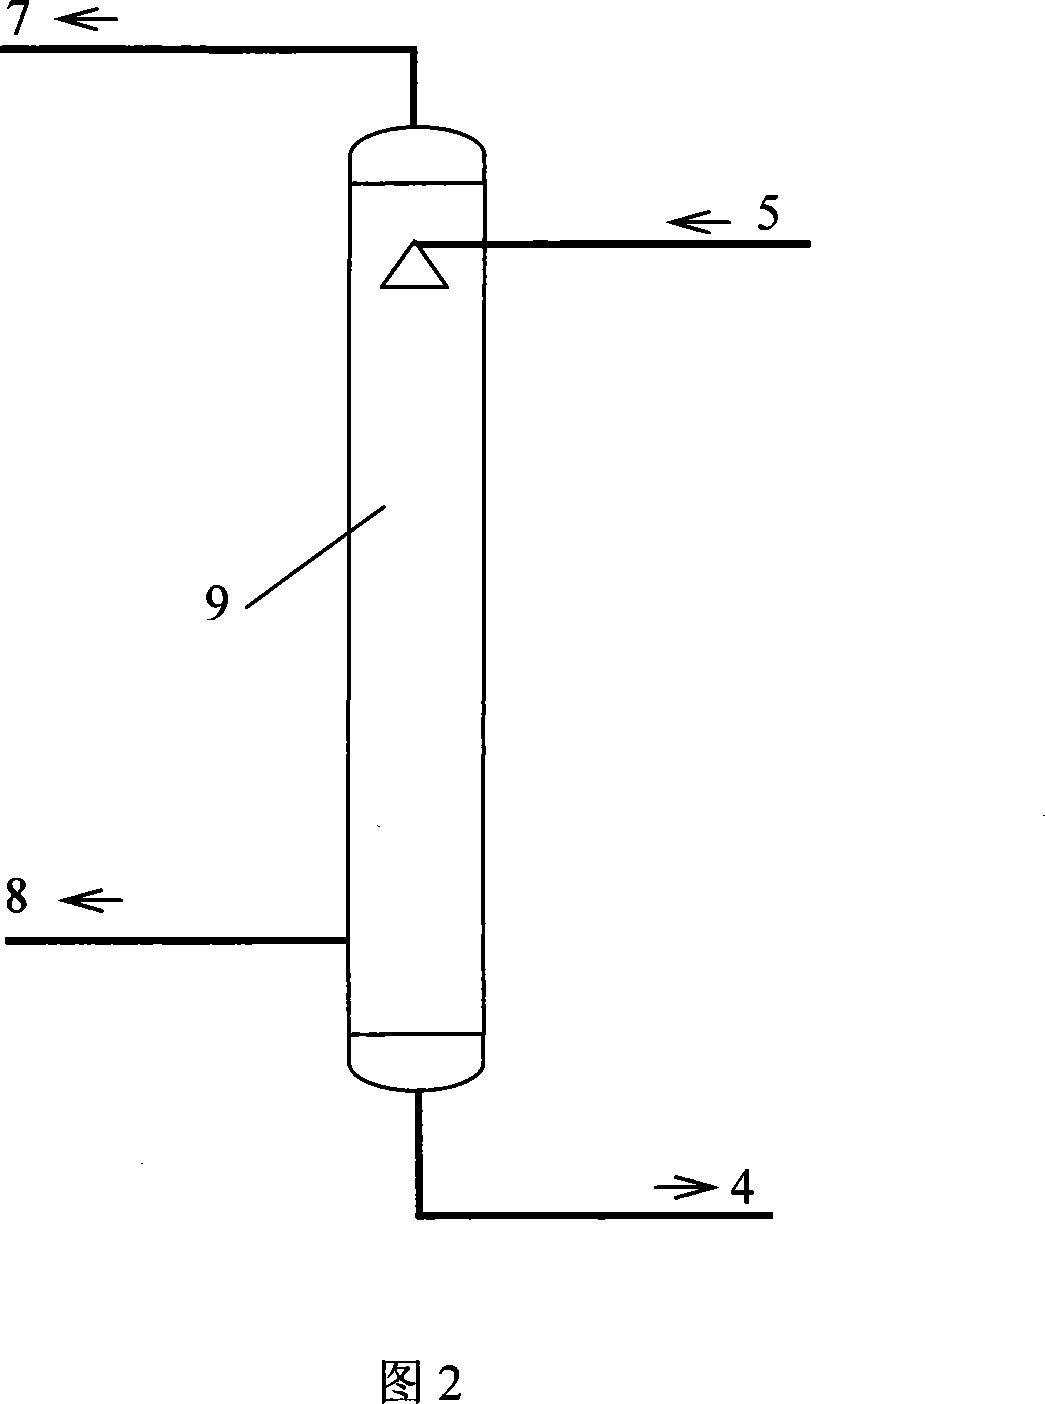 Method for ethylene glycol removing SOx (X=2 or 3) in flue gas